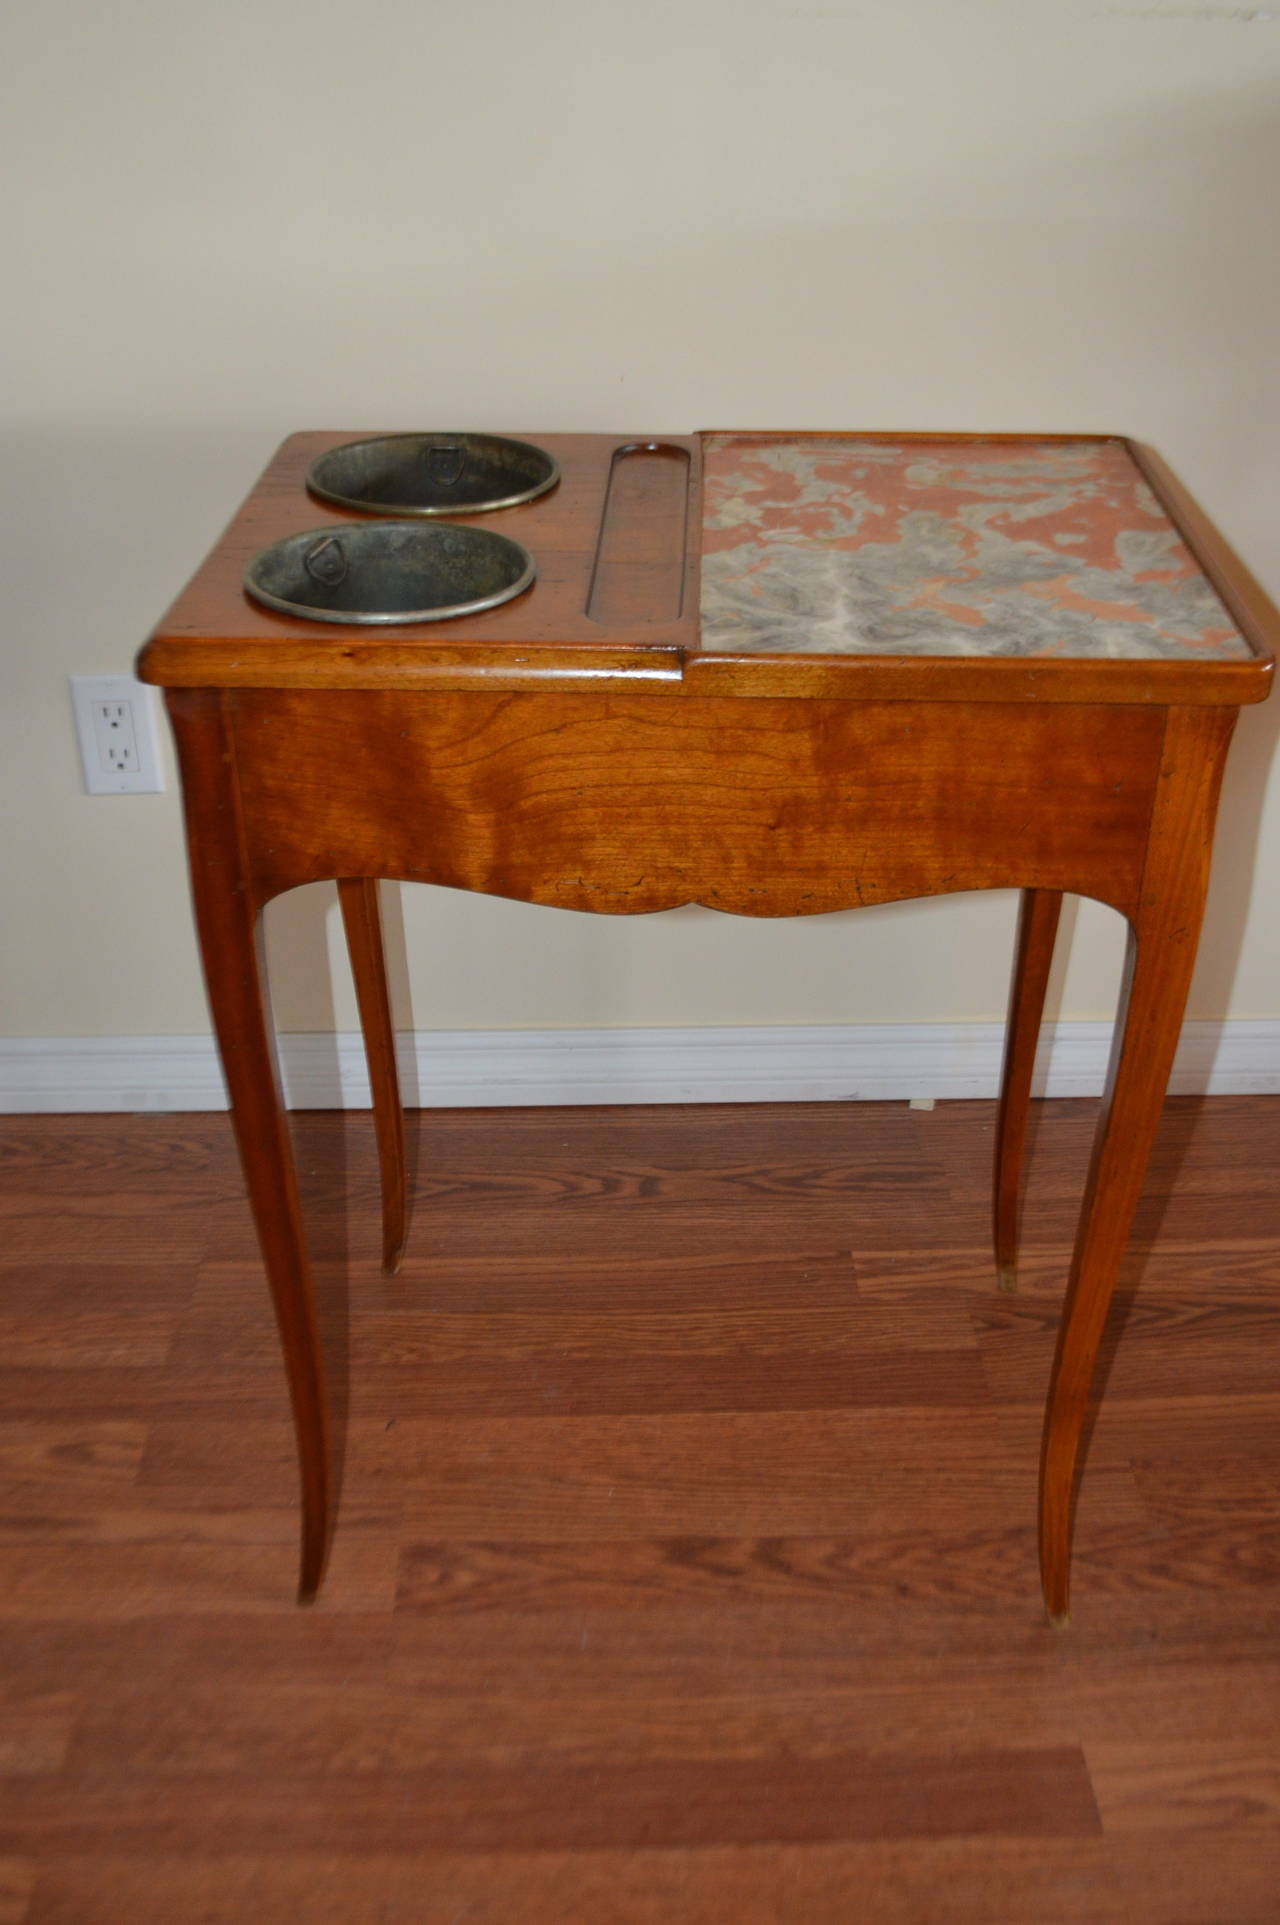 Mid-19th century, peg constructed cherrywood wine tasting table with two metal baskets to hold bottles and marble top for tasting. It has one drawer.